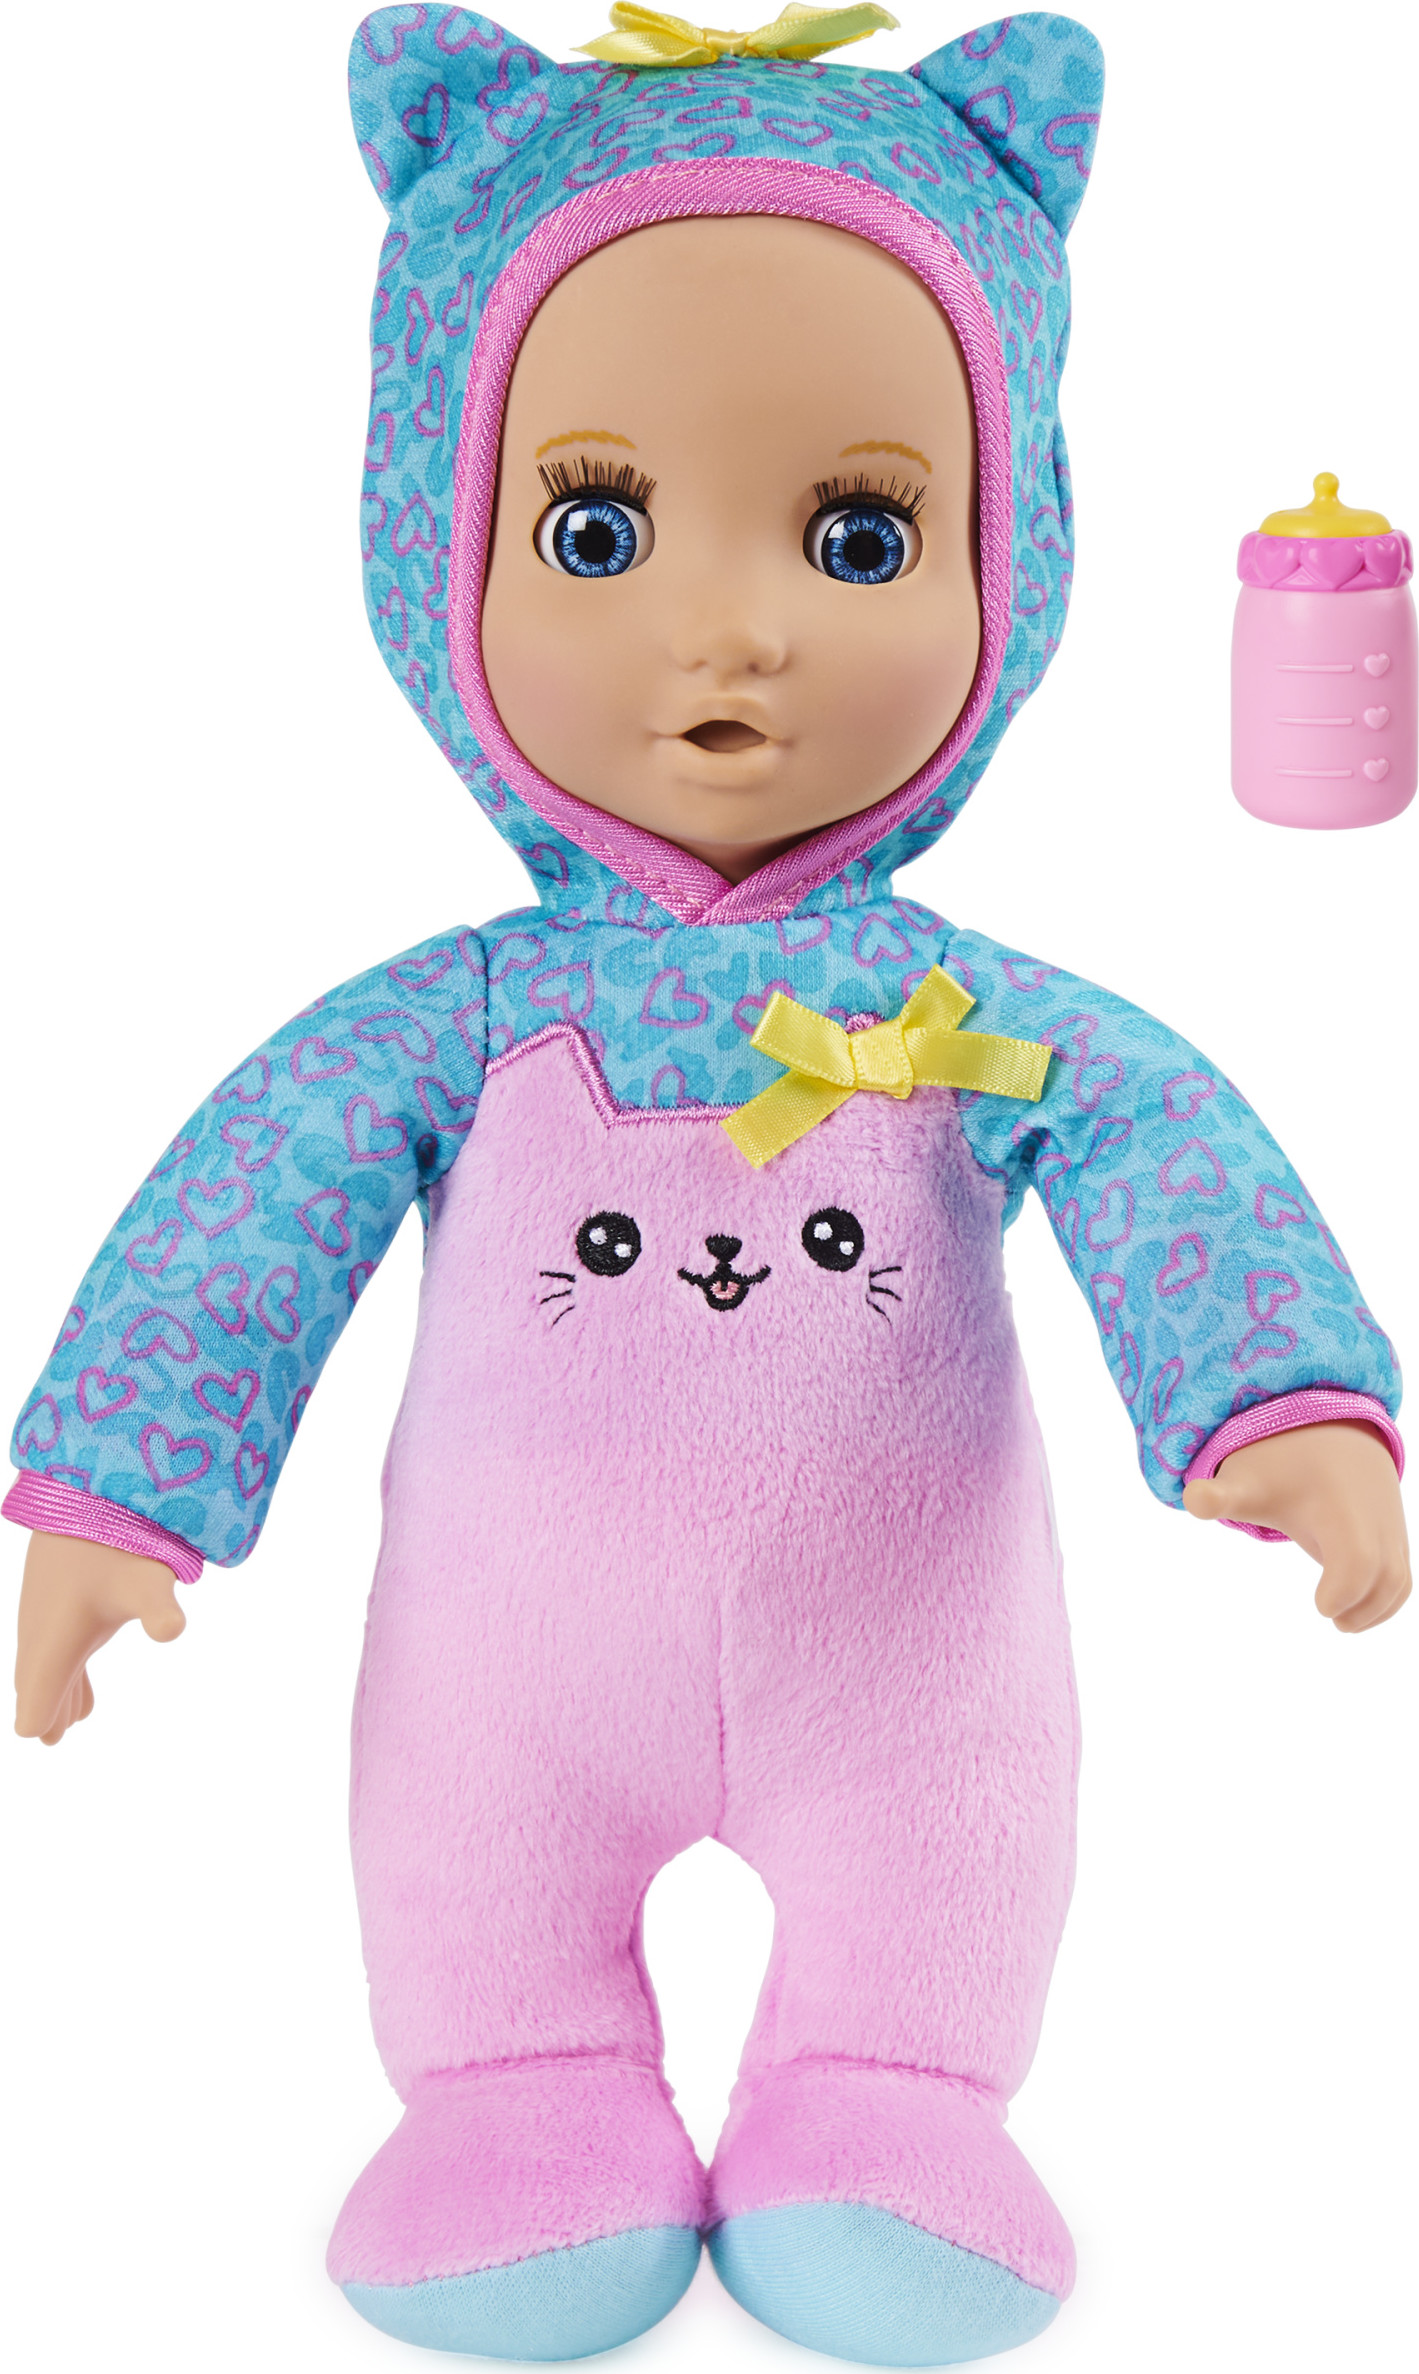 Luvzies by Luvabella, Kitten Onesie 11-inch Cuddly Baby Doll with Bottle Accessory, for Kids Aged 4 and up - image 1 of 5